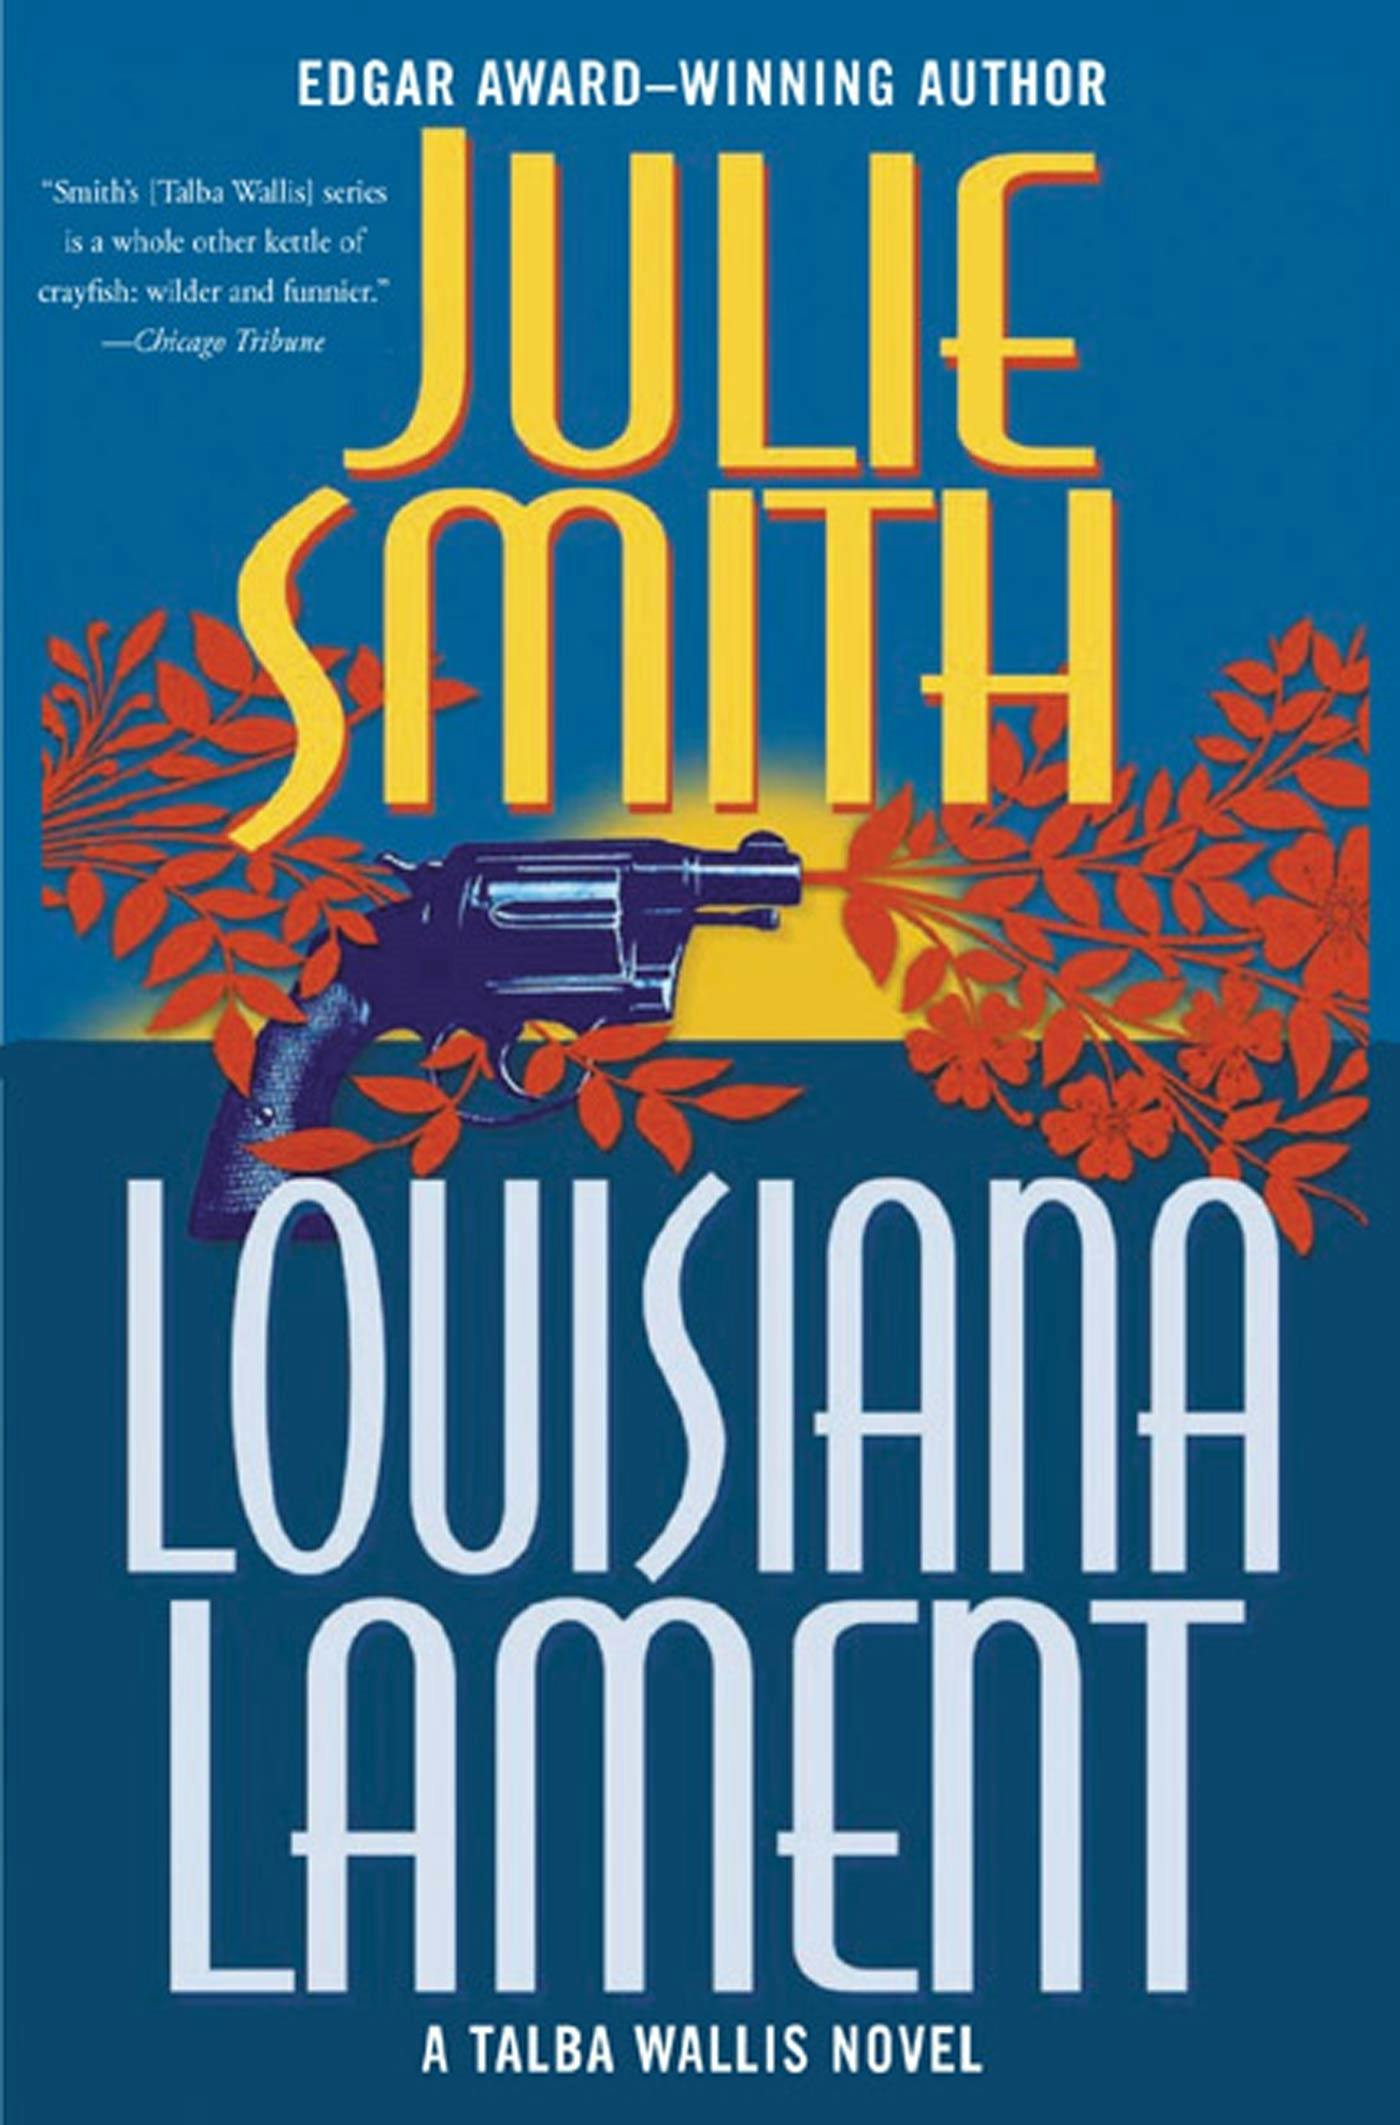 Cover for the book titled as: Louisiana Lament